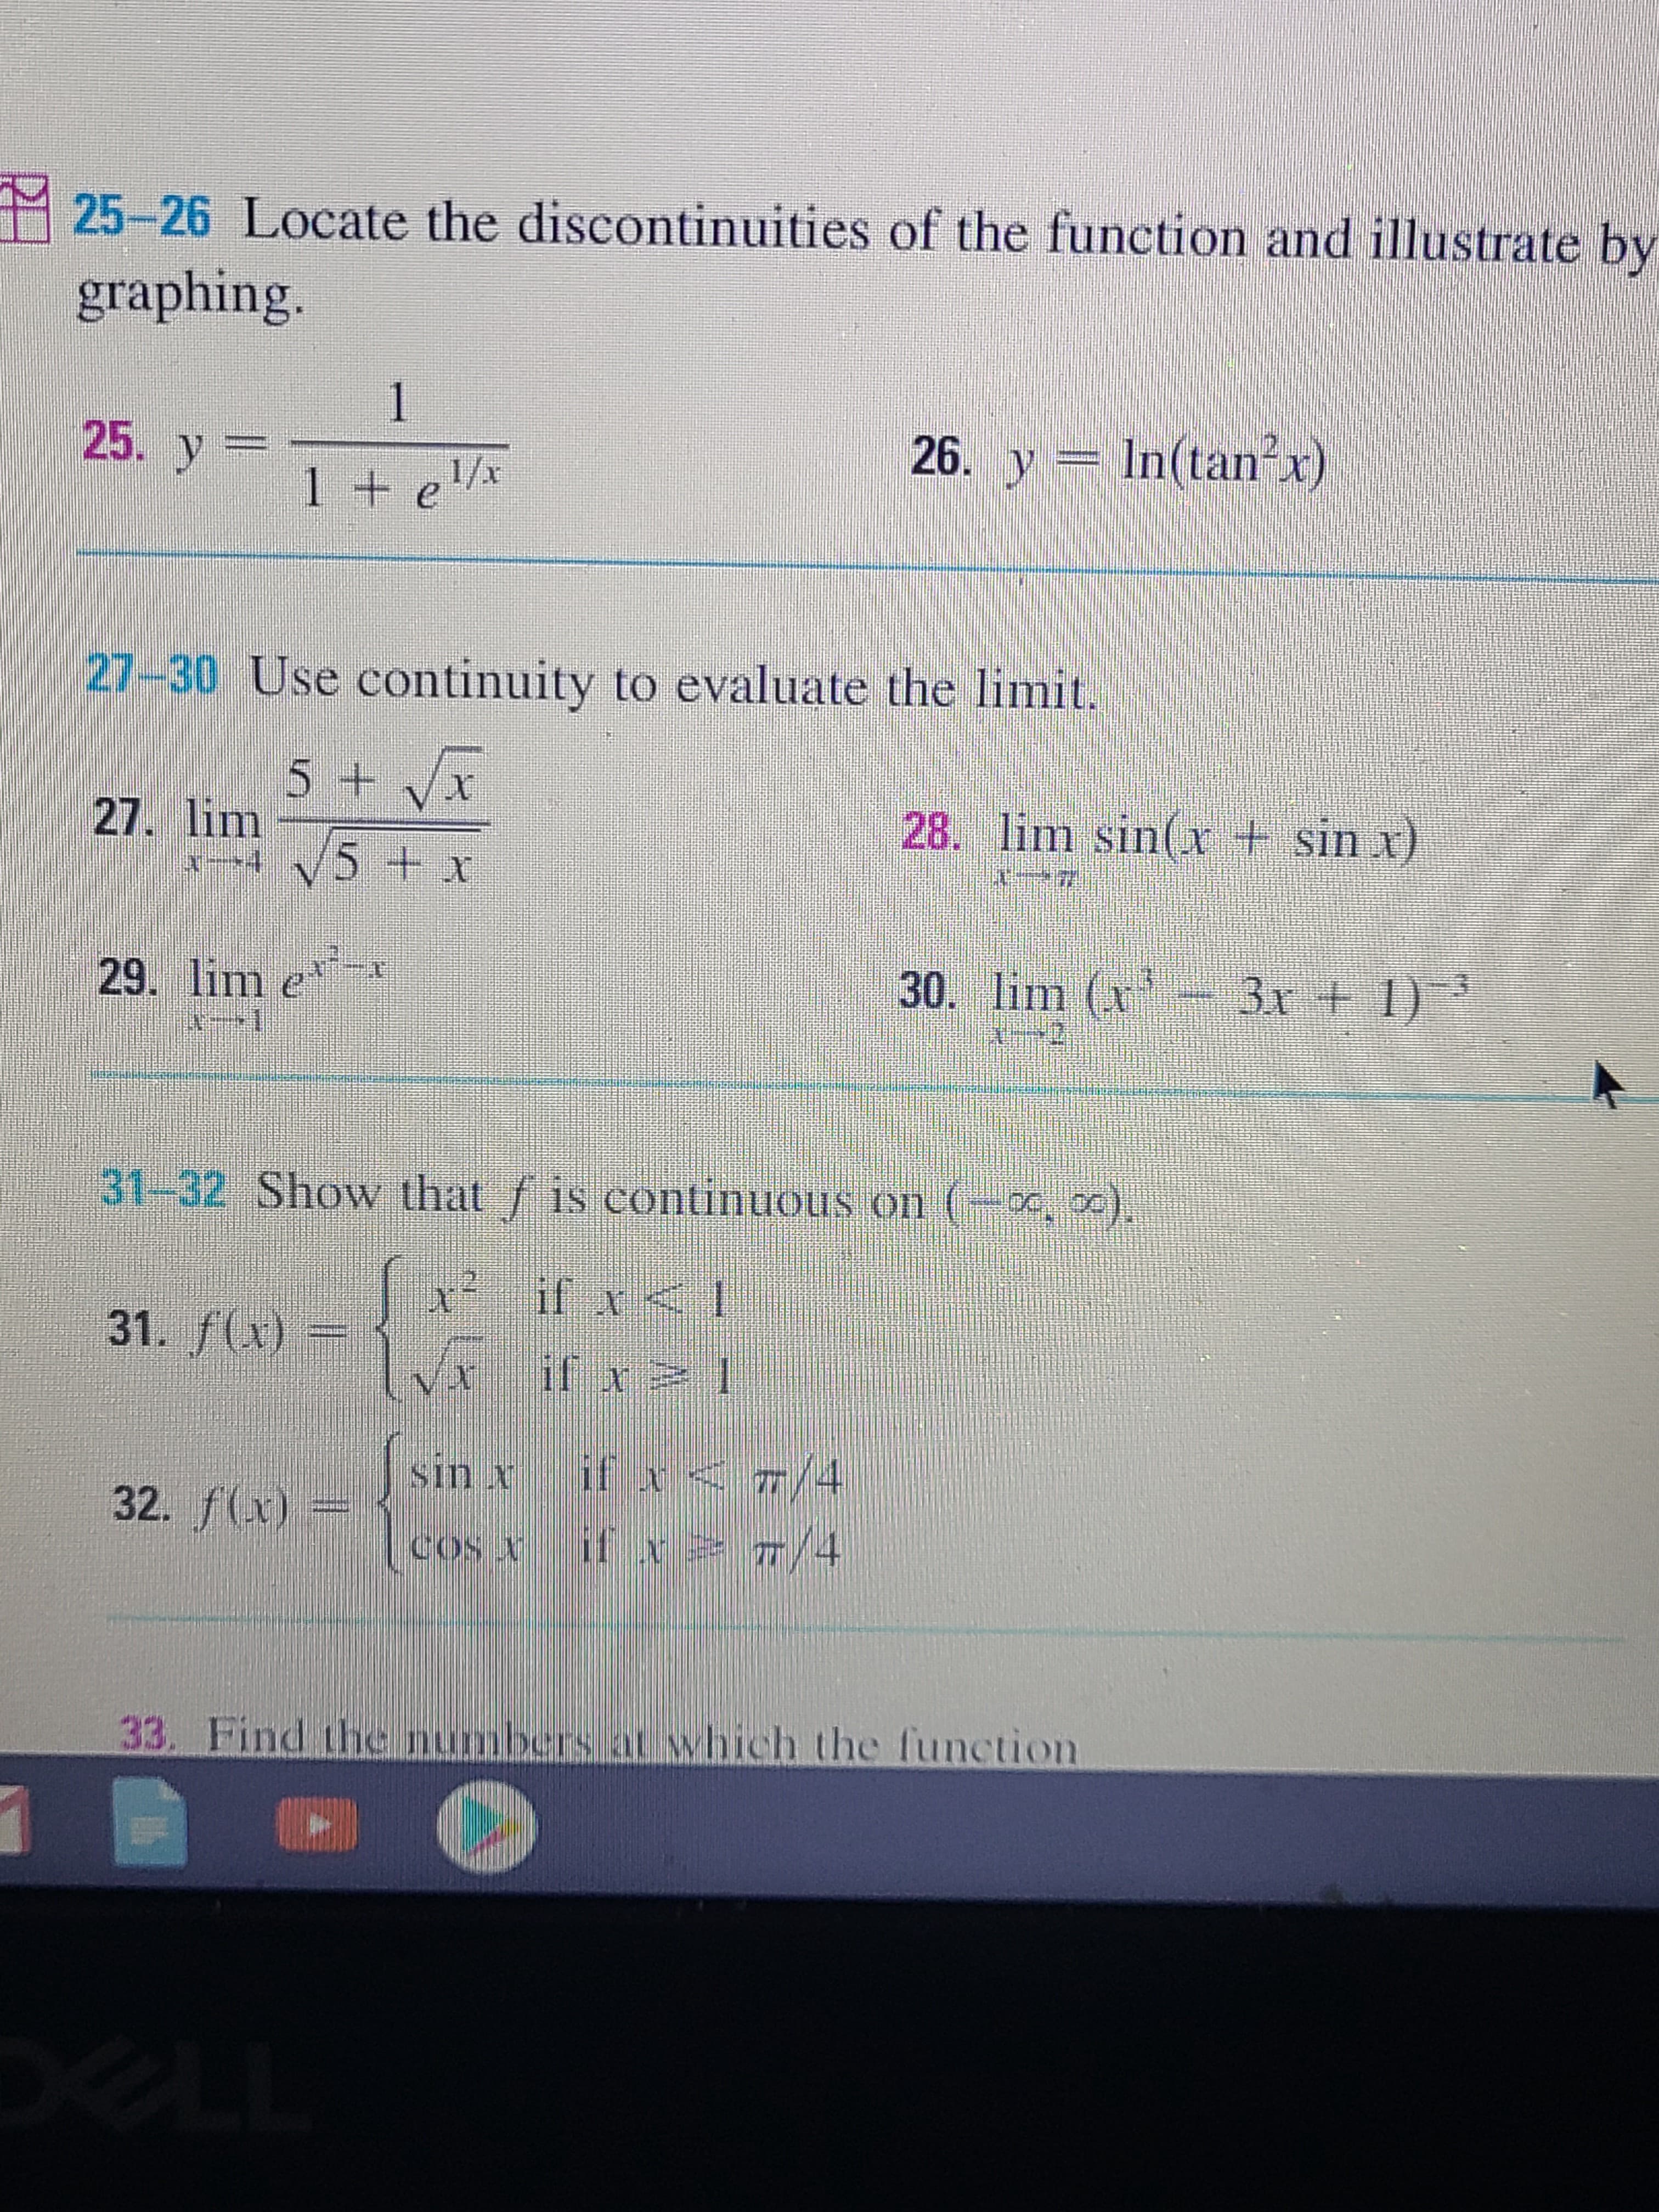 Use continuity to evaluate the limit.
5 + Vx
28. lim sin(x + sin x)
5+x
